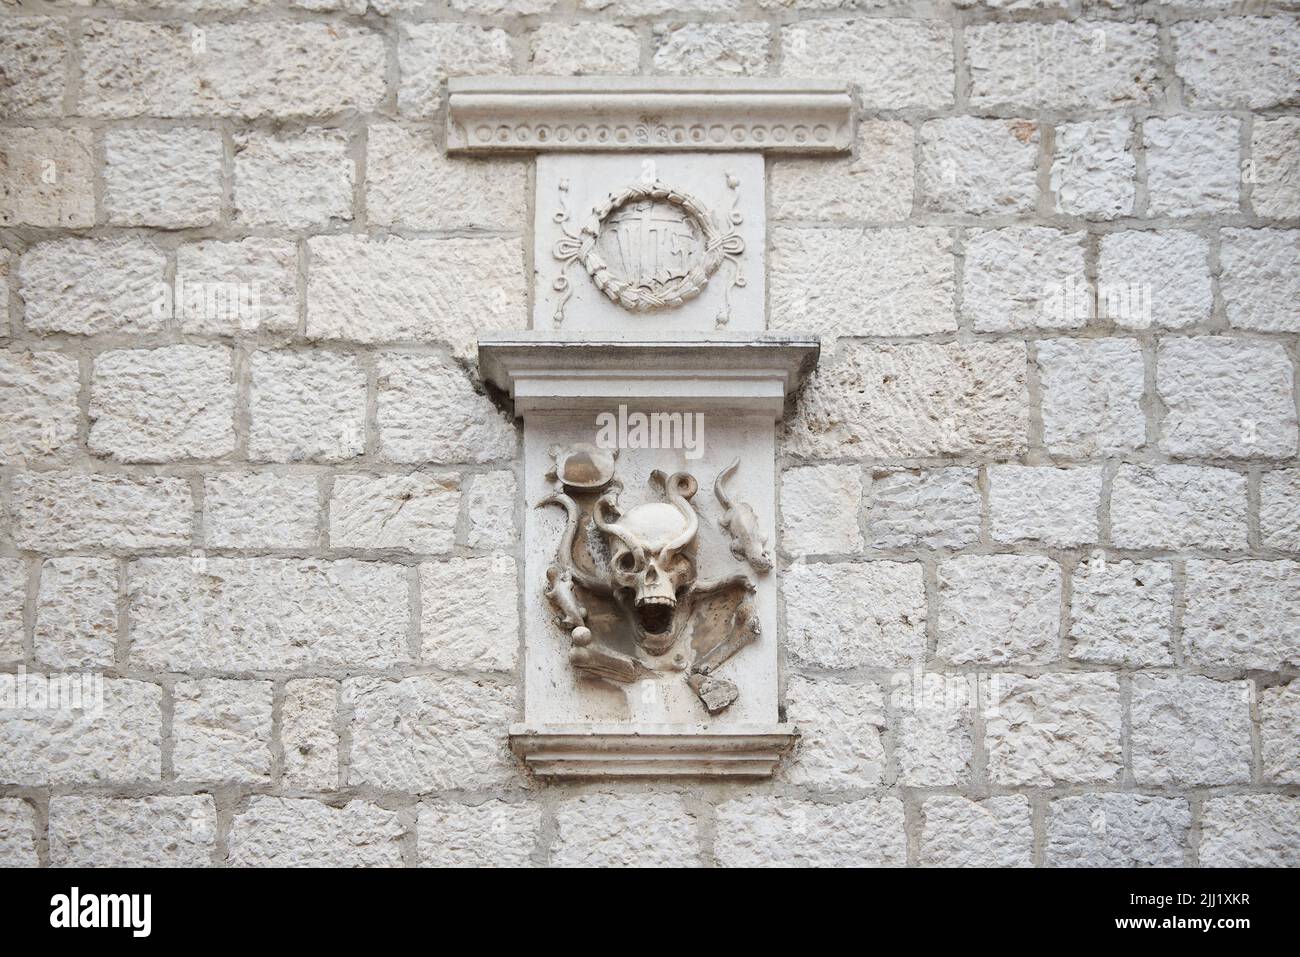 Figure of a skull on a stone wall of a building. Stock Photo